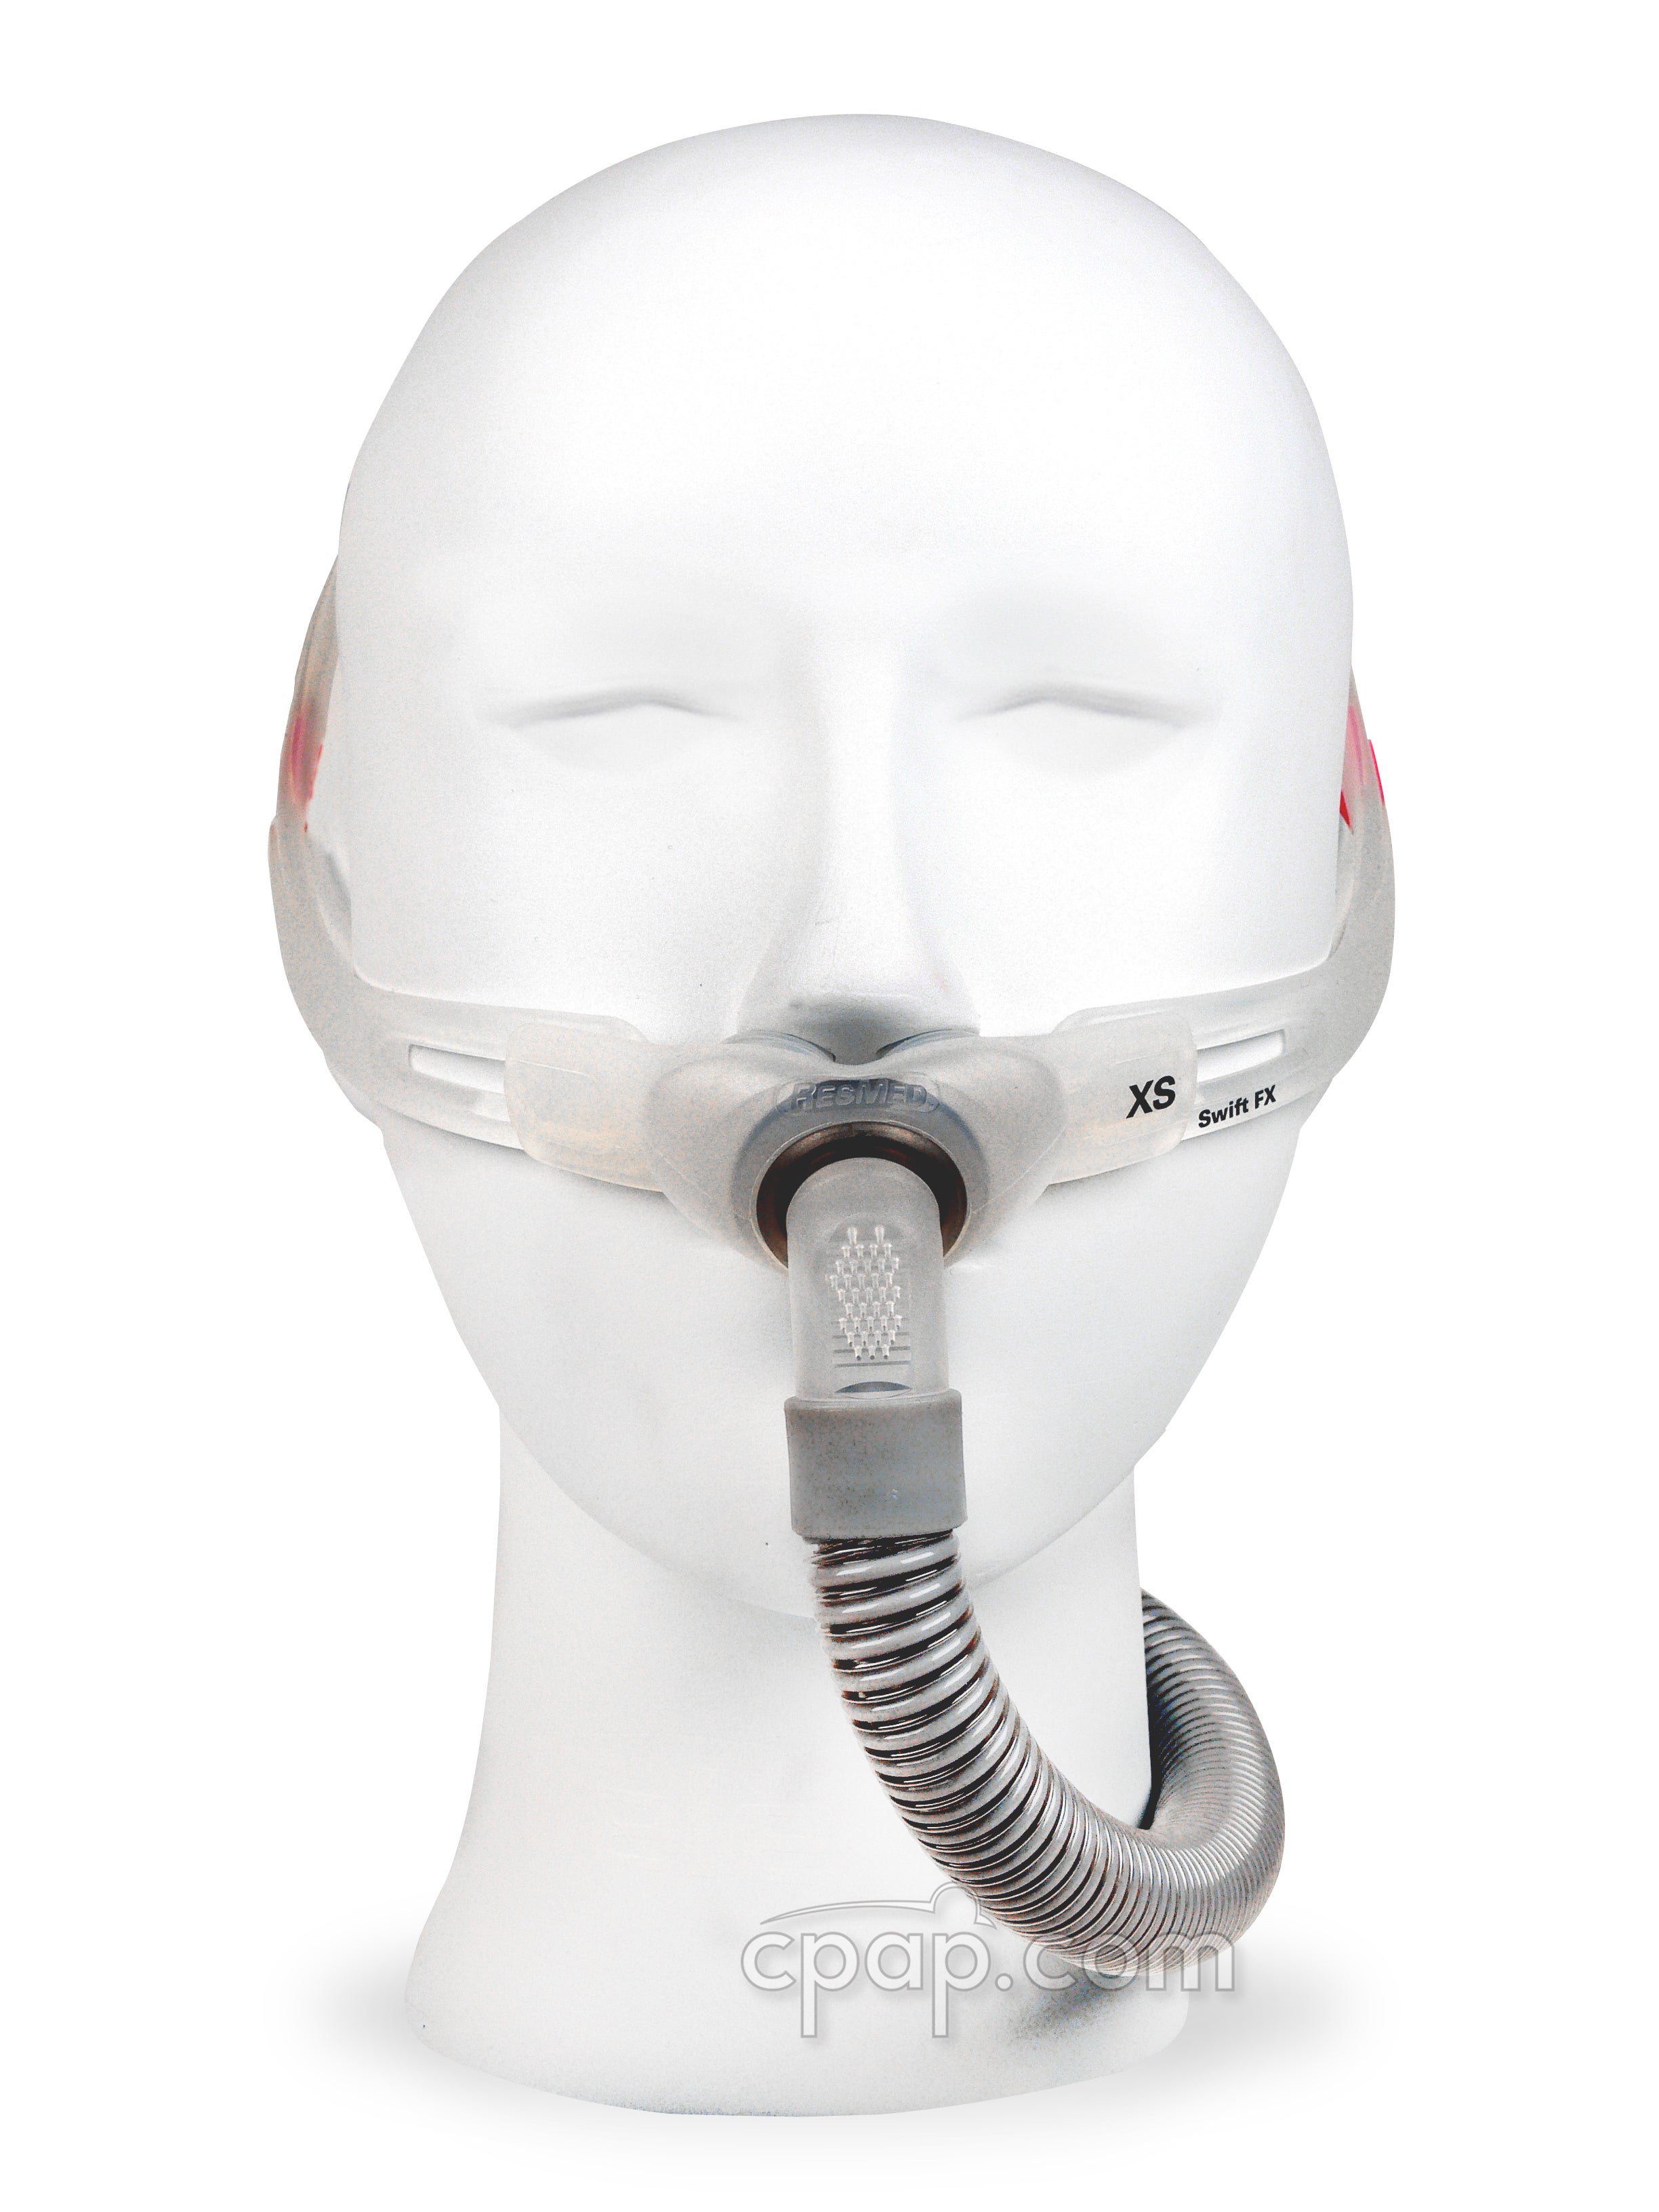 Resmed Swift™ Fx For Her Nasal Pillow Cpap Mask With Headgear 2771